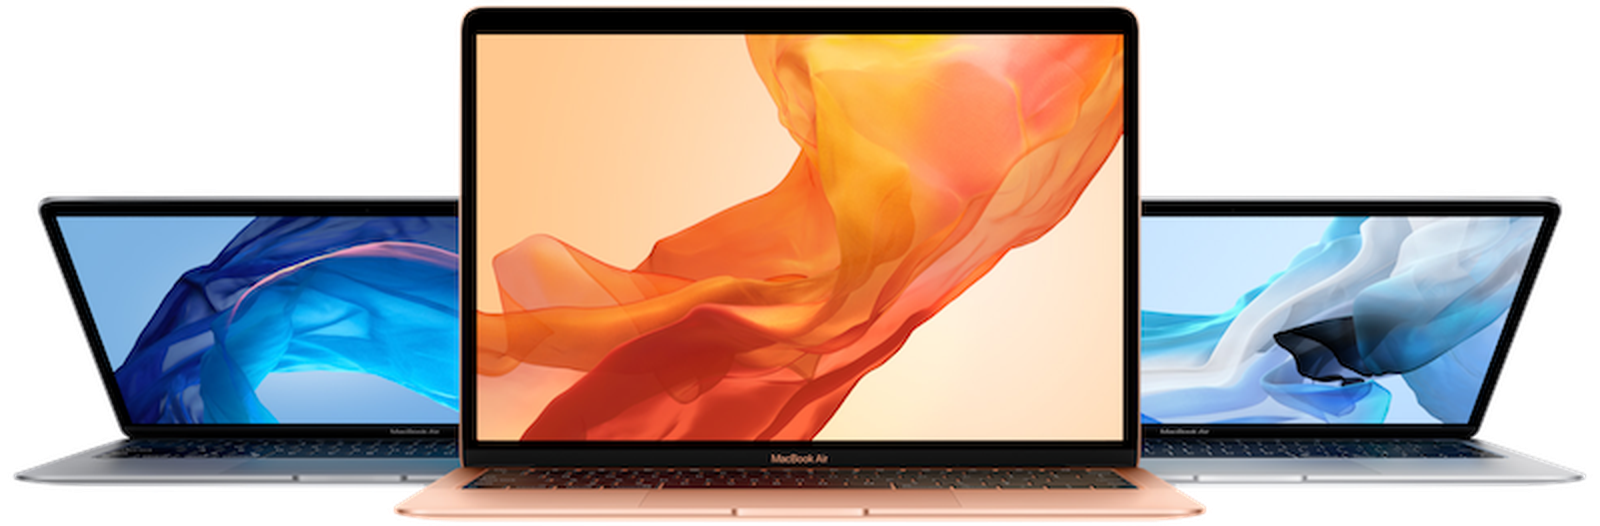 Deals: Get the 128GB 2019 MacBook Air for $899.99 at Amazon ($199 